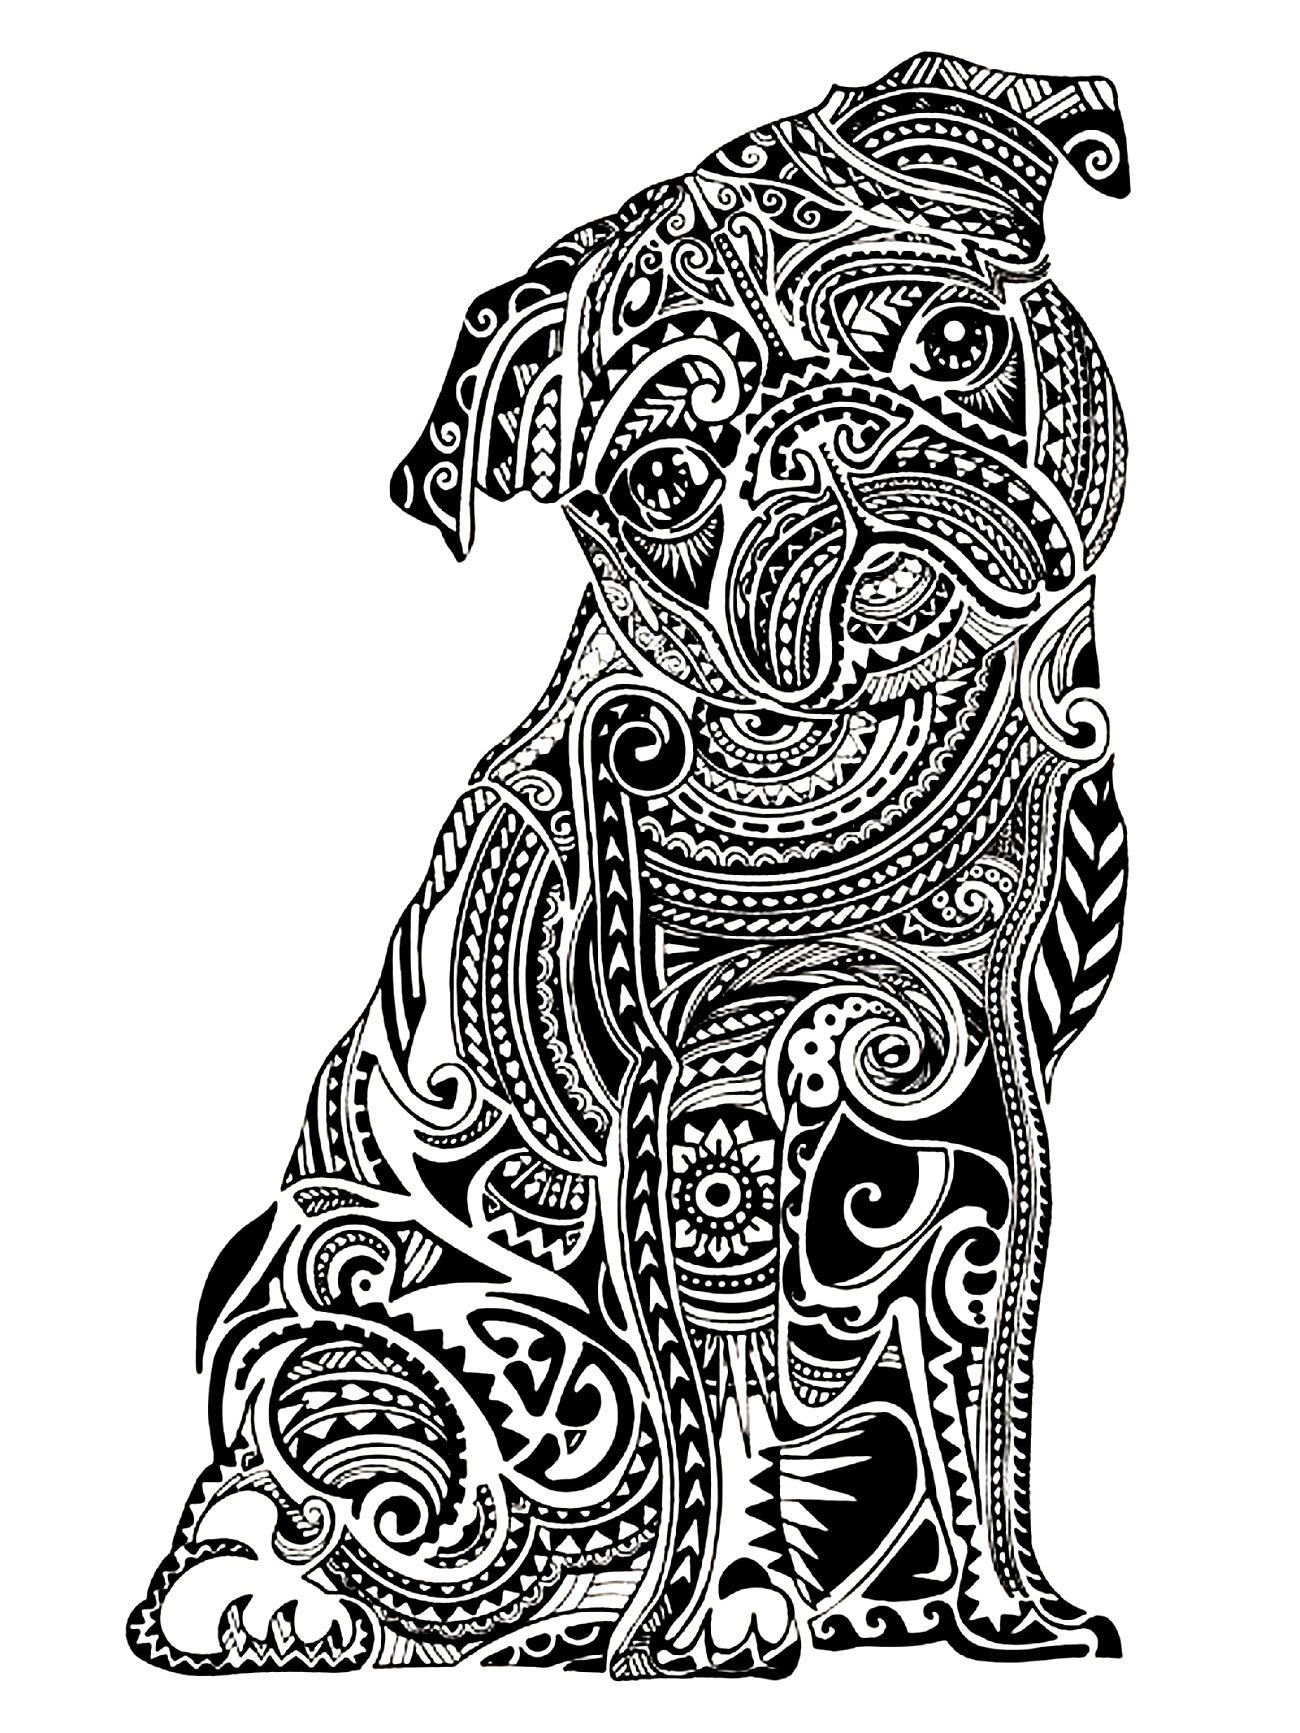 Dog Coloring Pages for Adults Best Coloring Pages For Kids